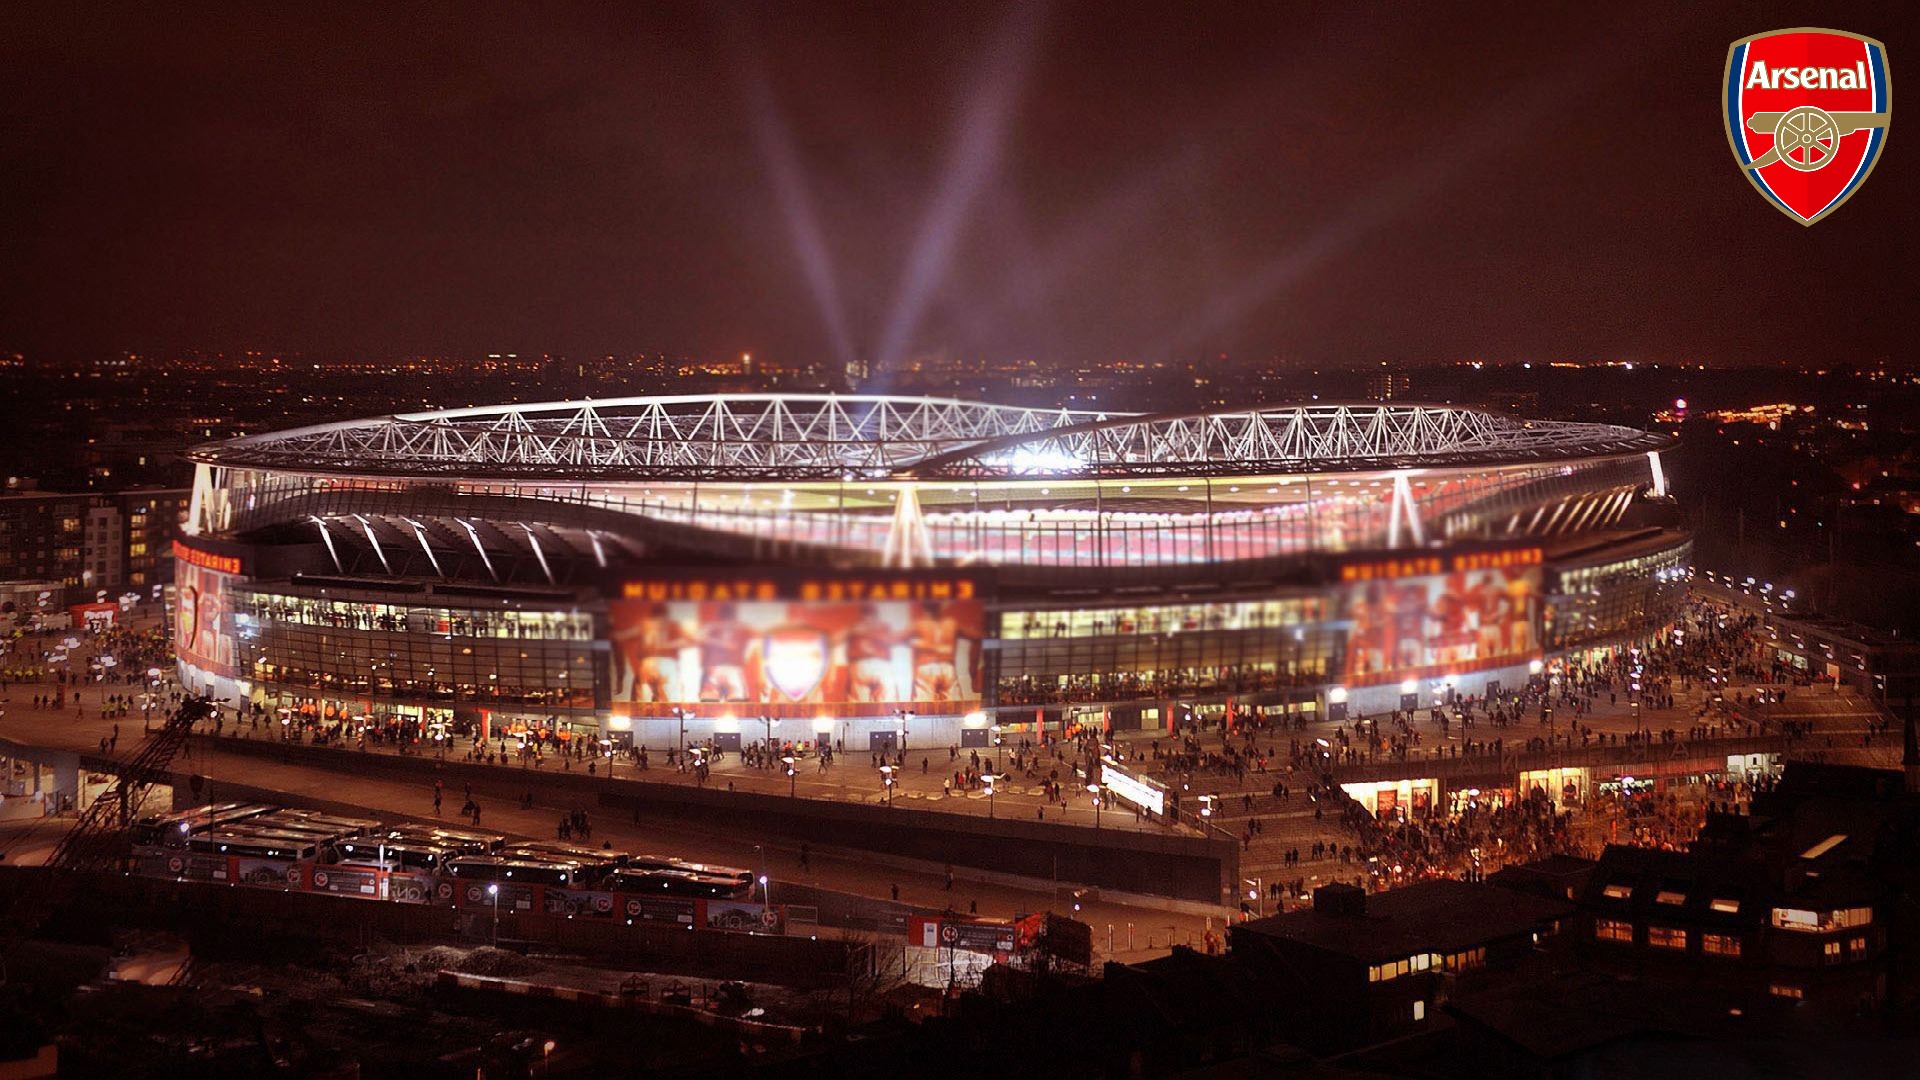 HD Arsenal Stadium Backgrounds With Resolution 1920X1080 pixel. You can make this wallpaper for your Mac or Windows Desktop Background, iPhone, Android or Tablet and another Smartphone device for free